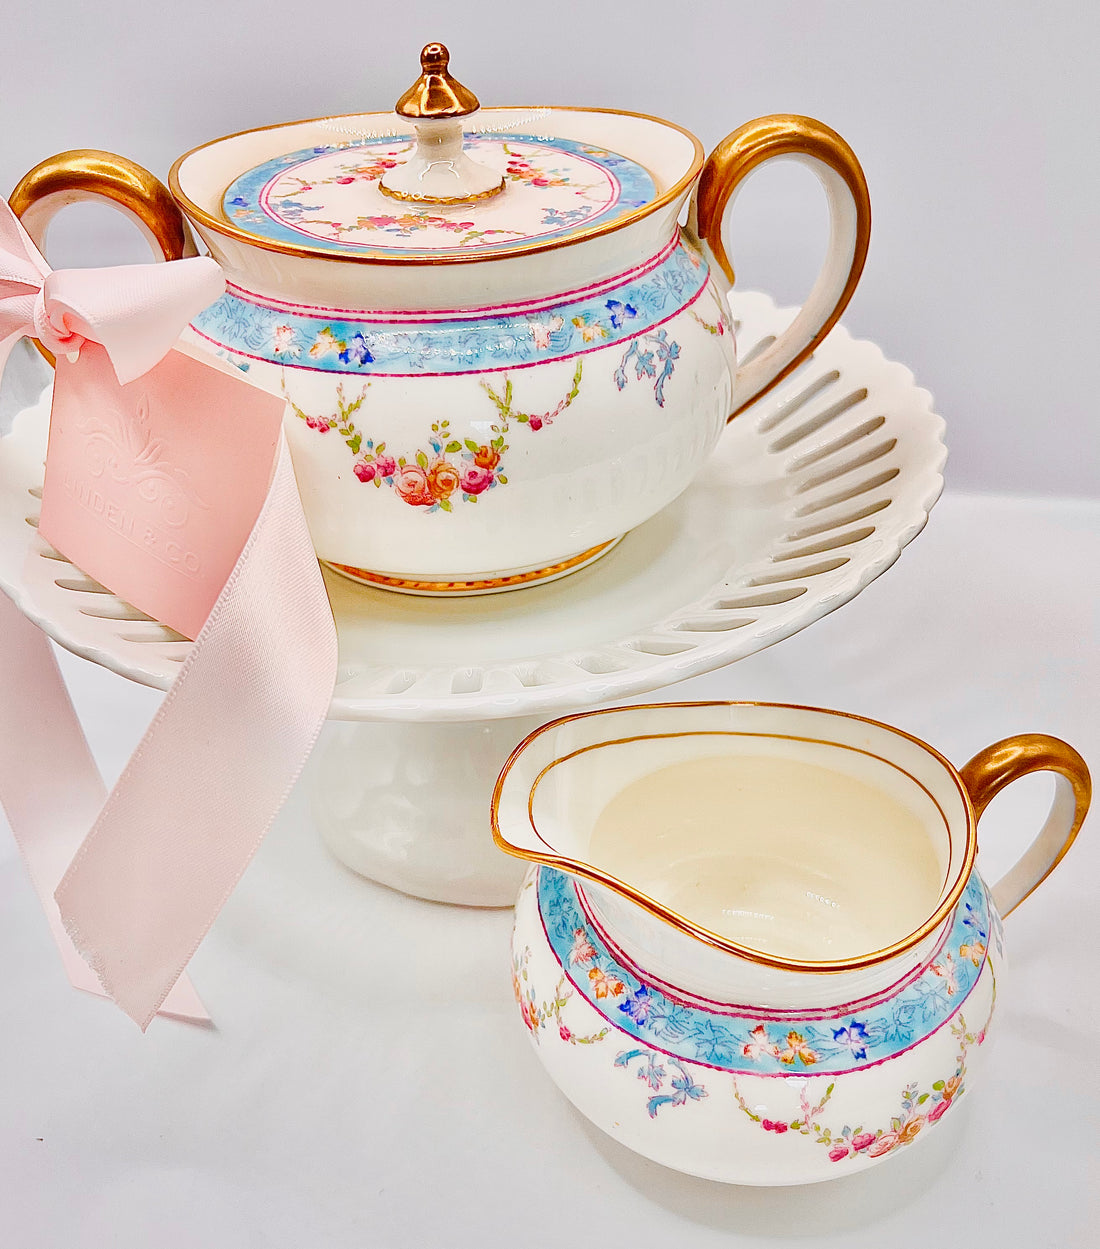 Aqua and gold dish and creamer set with pink accents